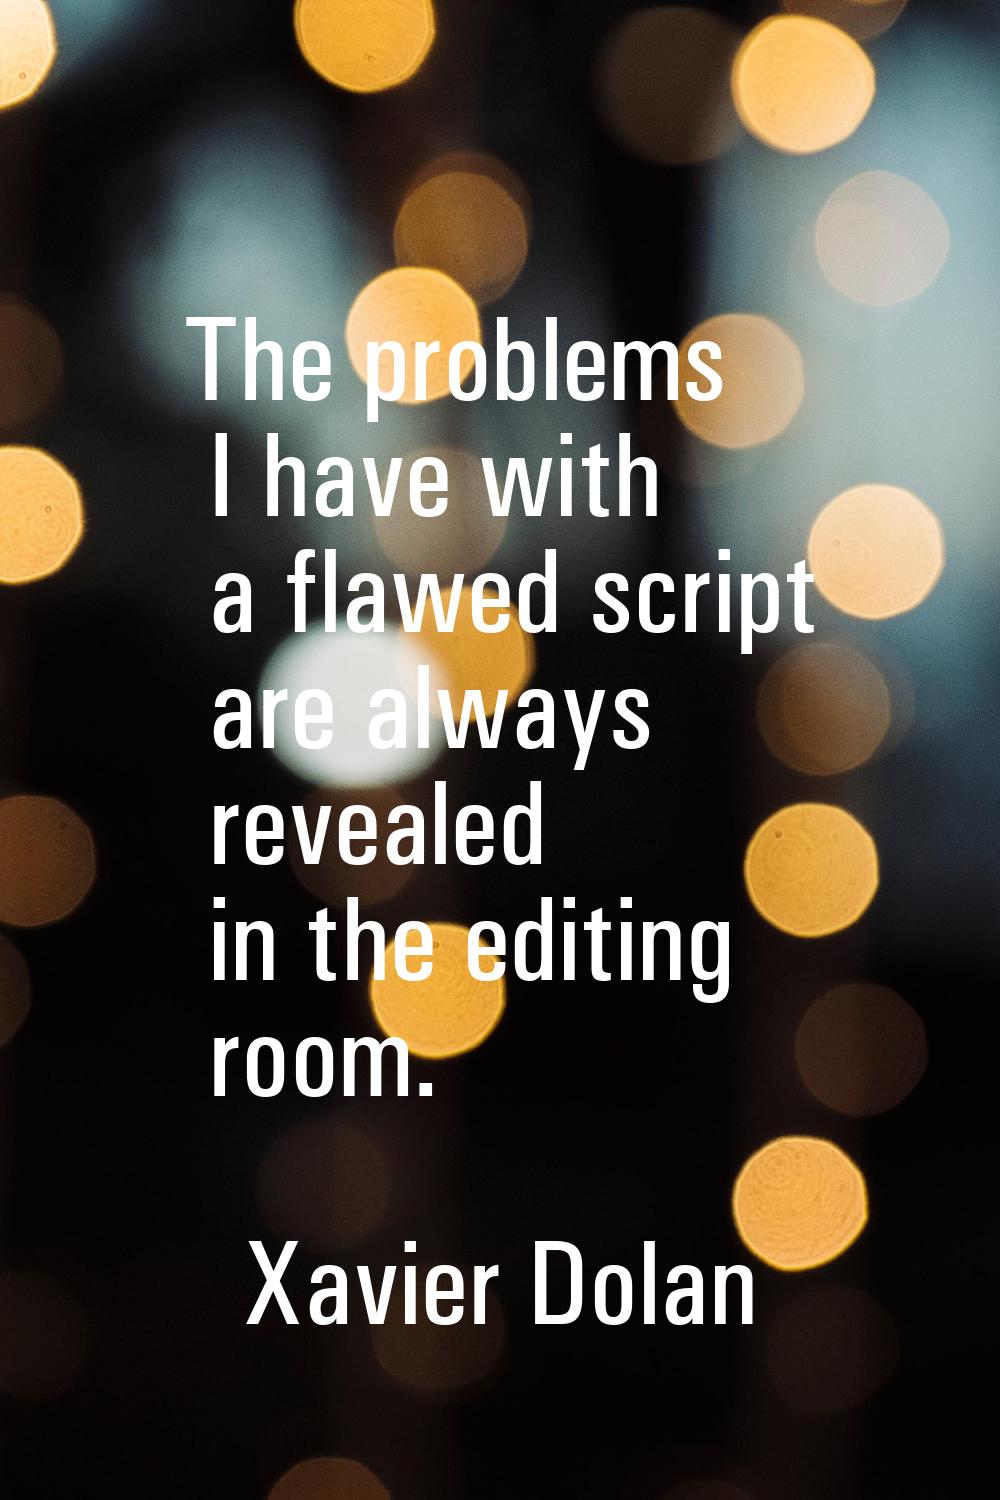 The problems I have with a flawed script are always revealed in the editing room.